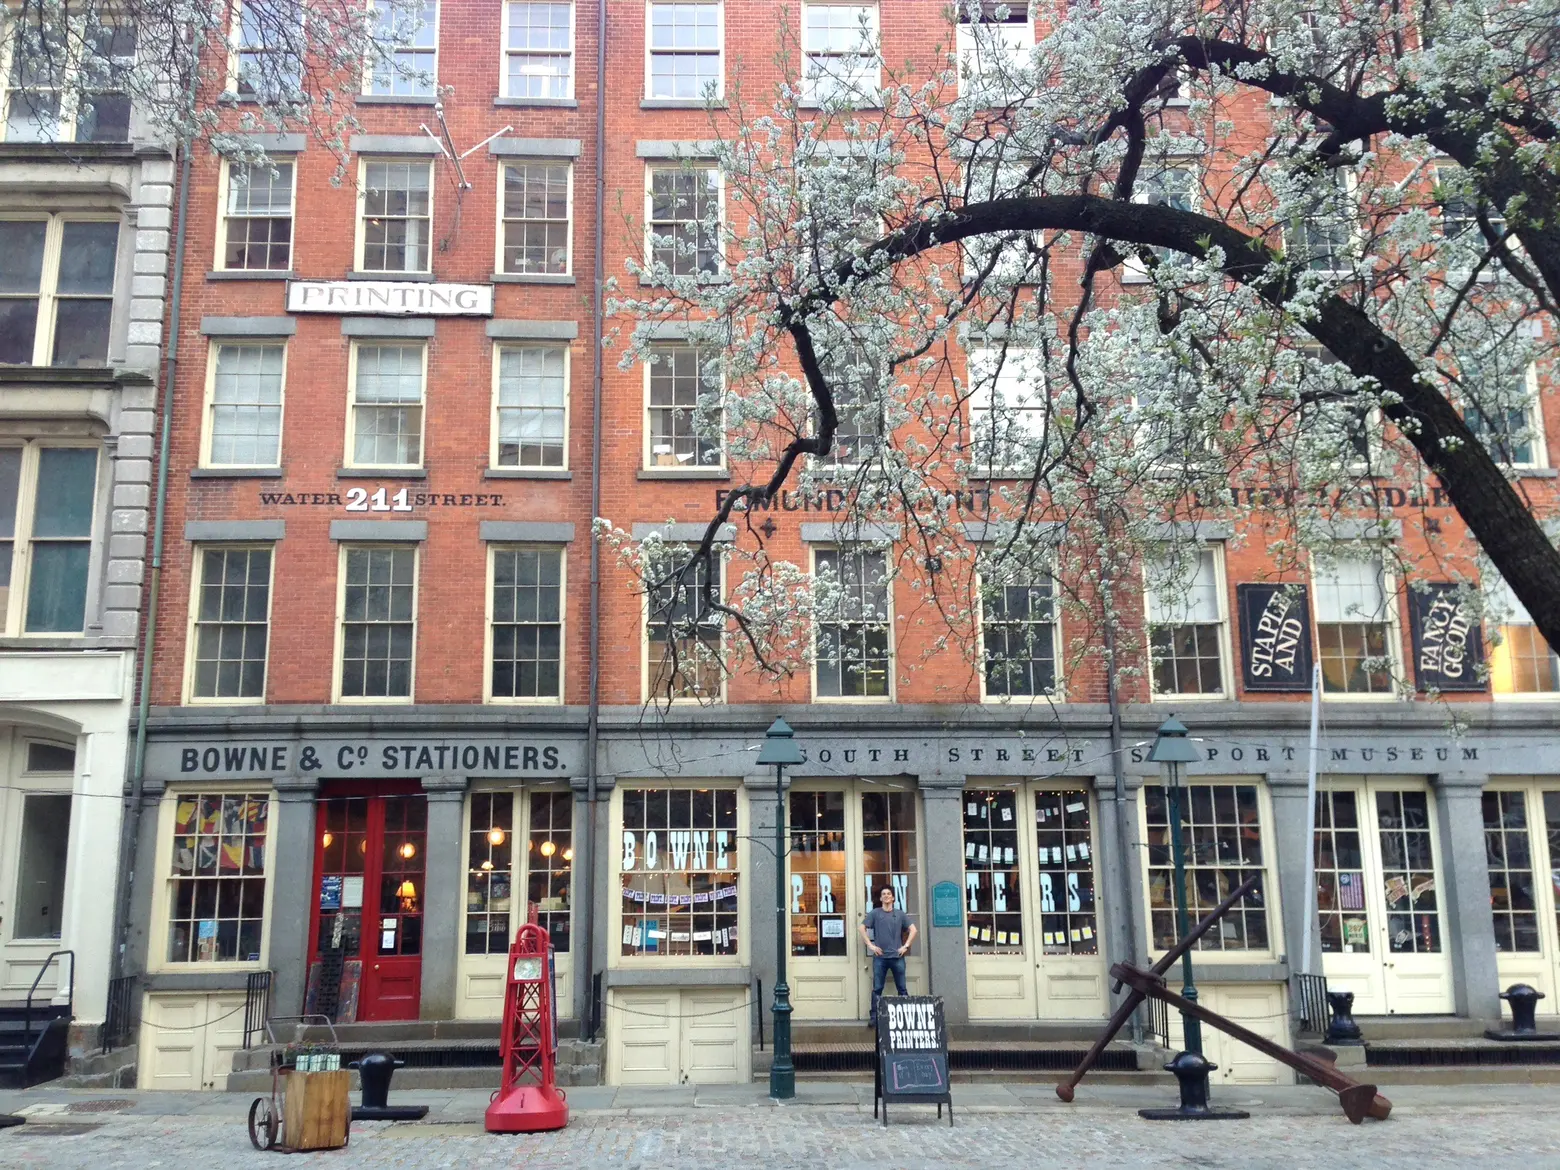 South Street Seaport Museum, South Street Seaport Historic District, Bowne & Co. Stationers, Captain Jonathan Boulware